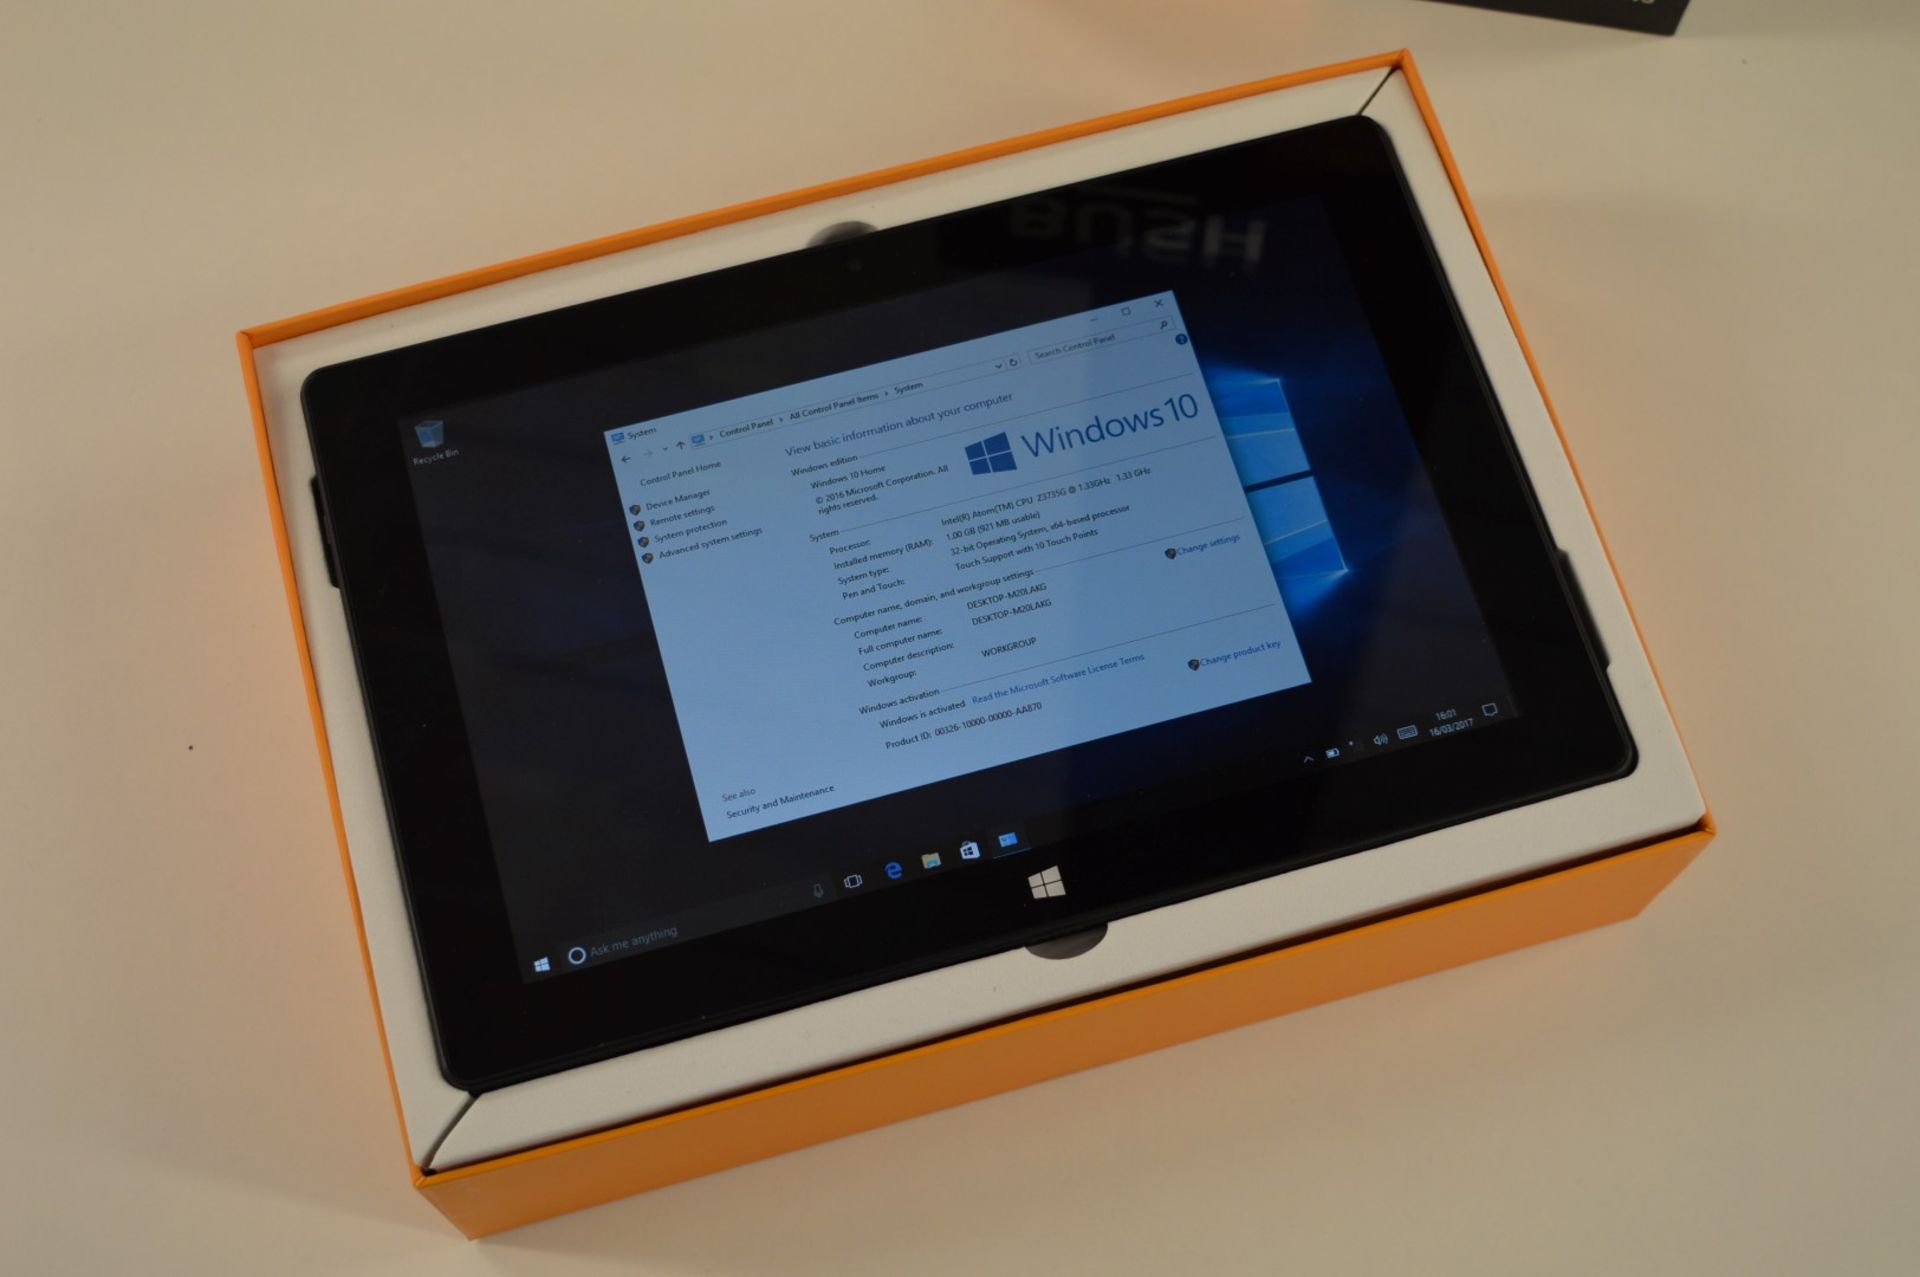 1 x Bush A1 10.1 Inch Windows Tablet - Features Include Intel Atom 1.8ghz Quad Core Processor, 1gb - Image 6 of 11